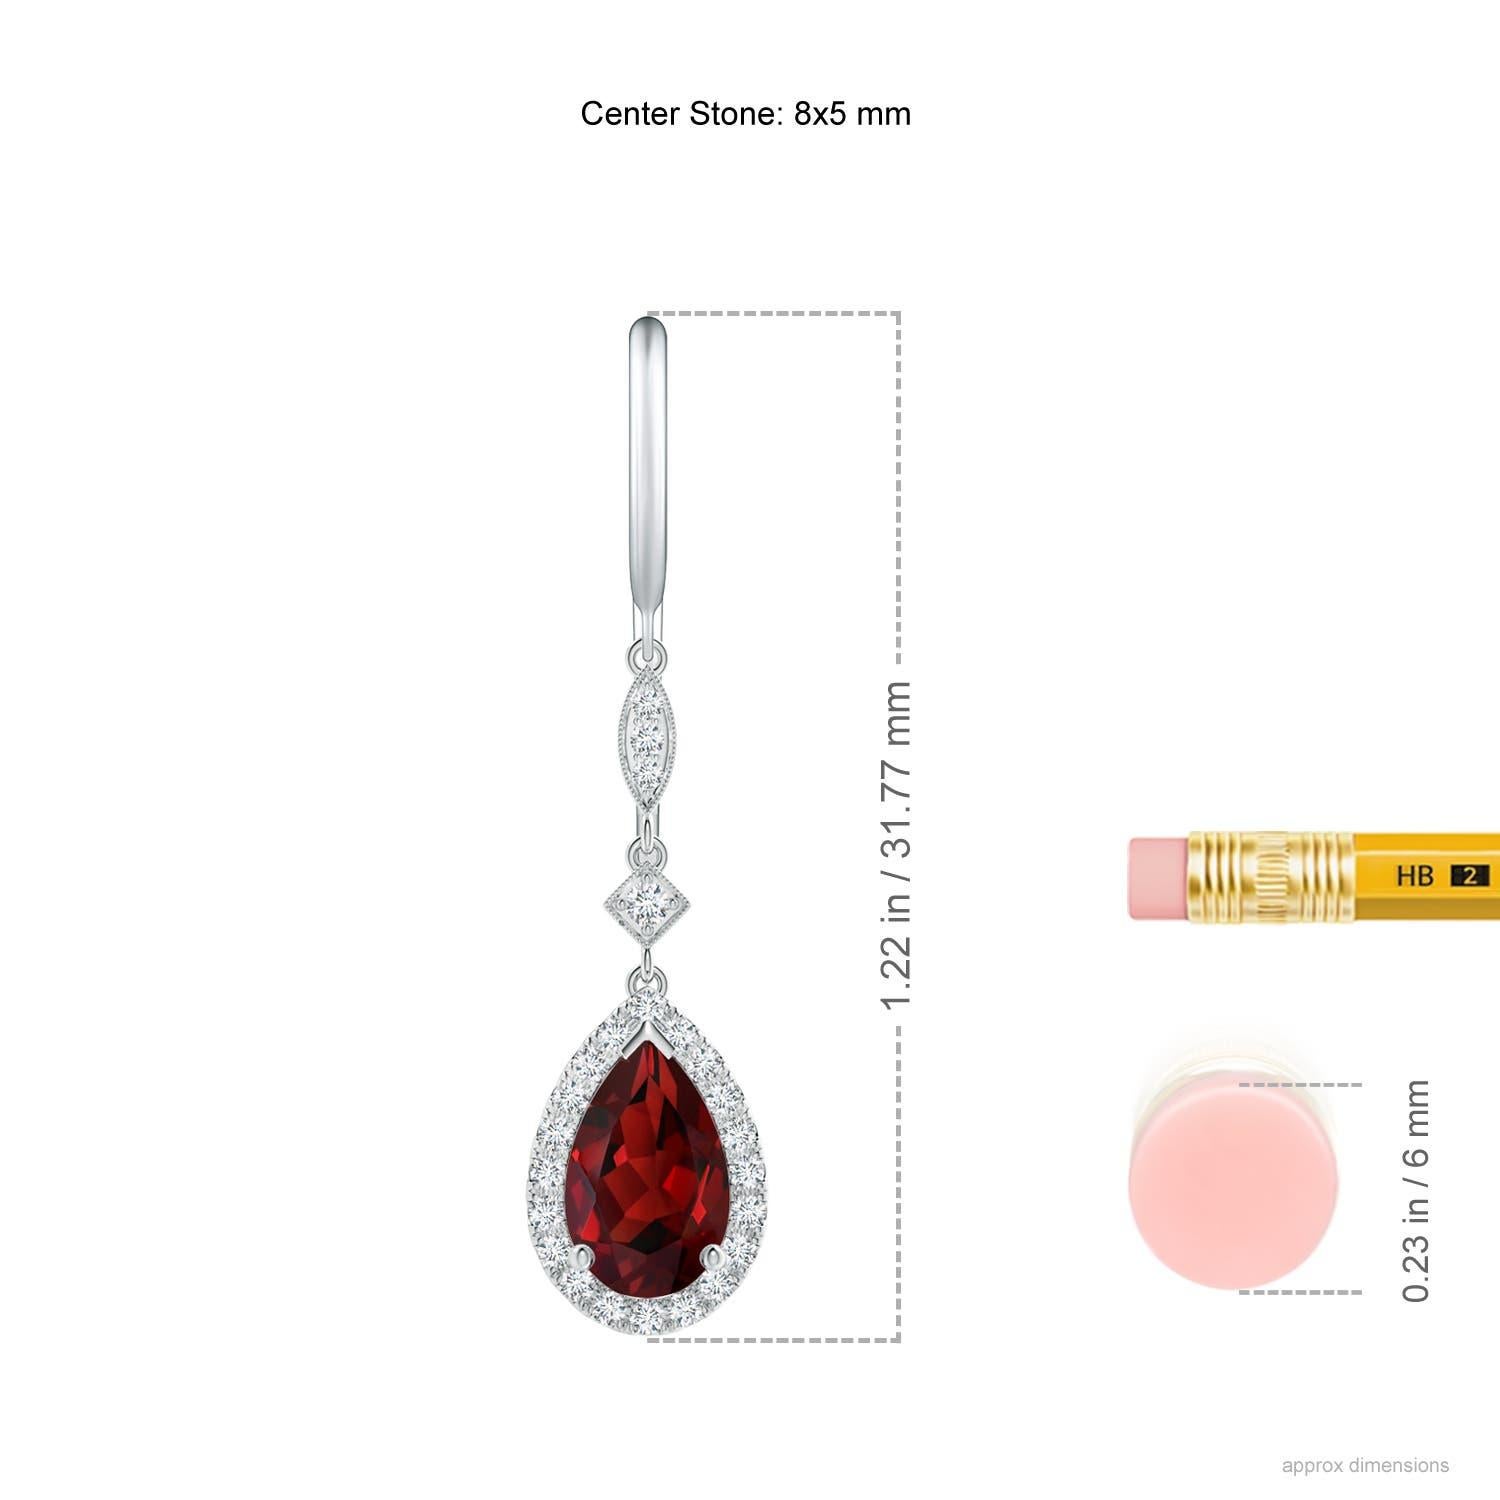 Dangling from shepherd hooks are these beautifully crafted garnet dangle earrings in platinum. Pear-shaped garnets are illuminated by a halo of precious white diamonds that create a remarkable contrast. They are connected to station diamonds nestled